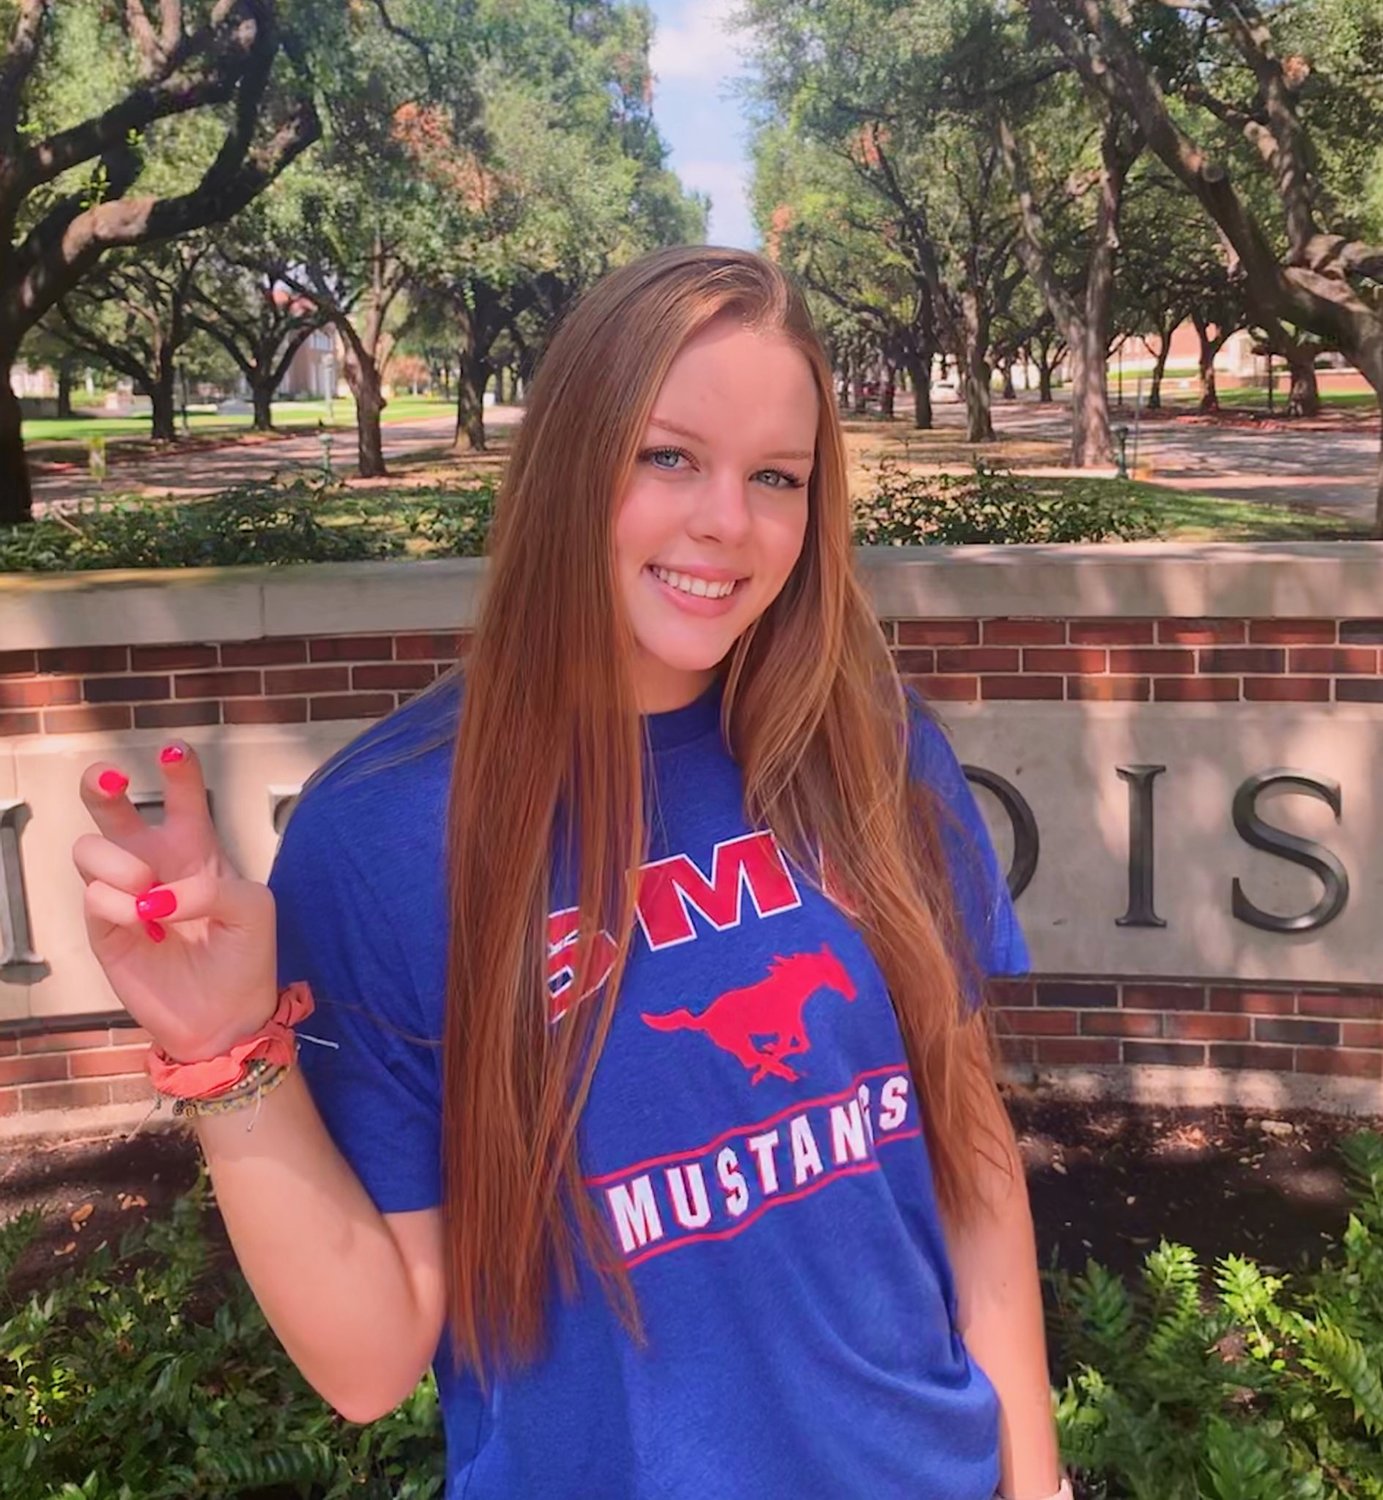 Seven Lakes junior setter Casey Batenhorst verbally committed to continue her volleyball career at SMU on Sept. 10.